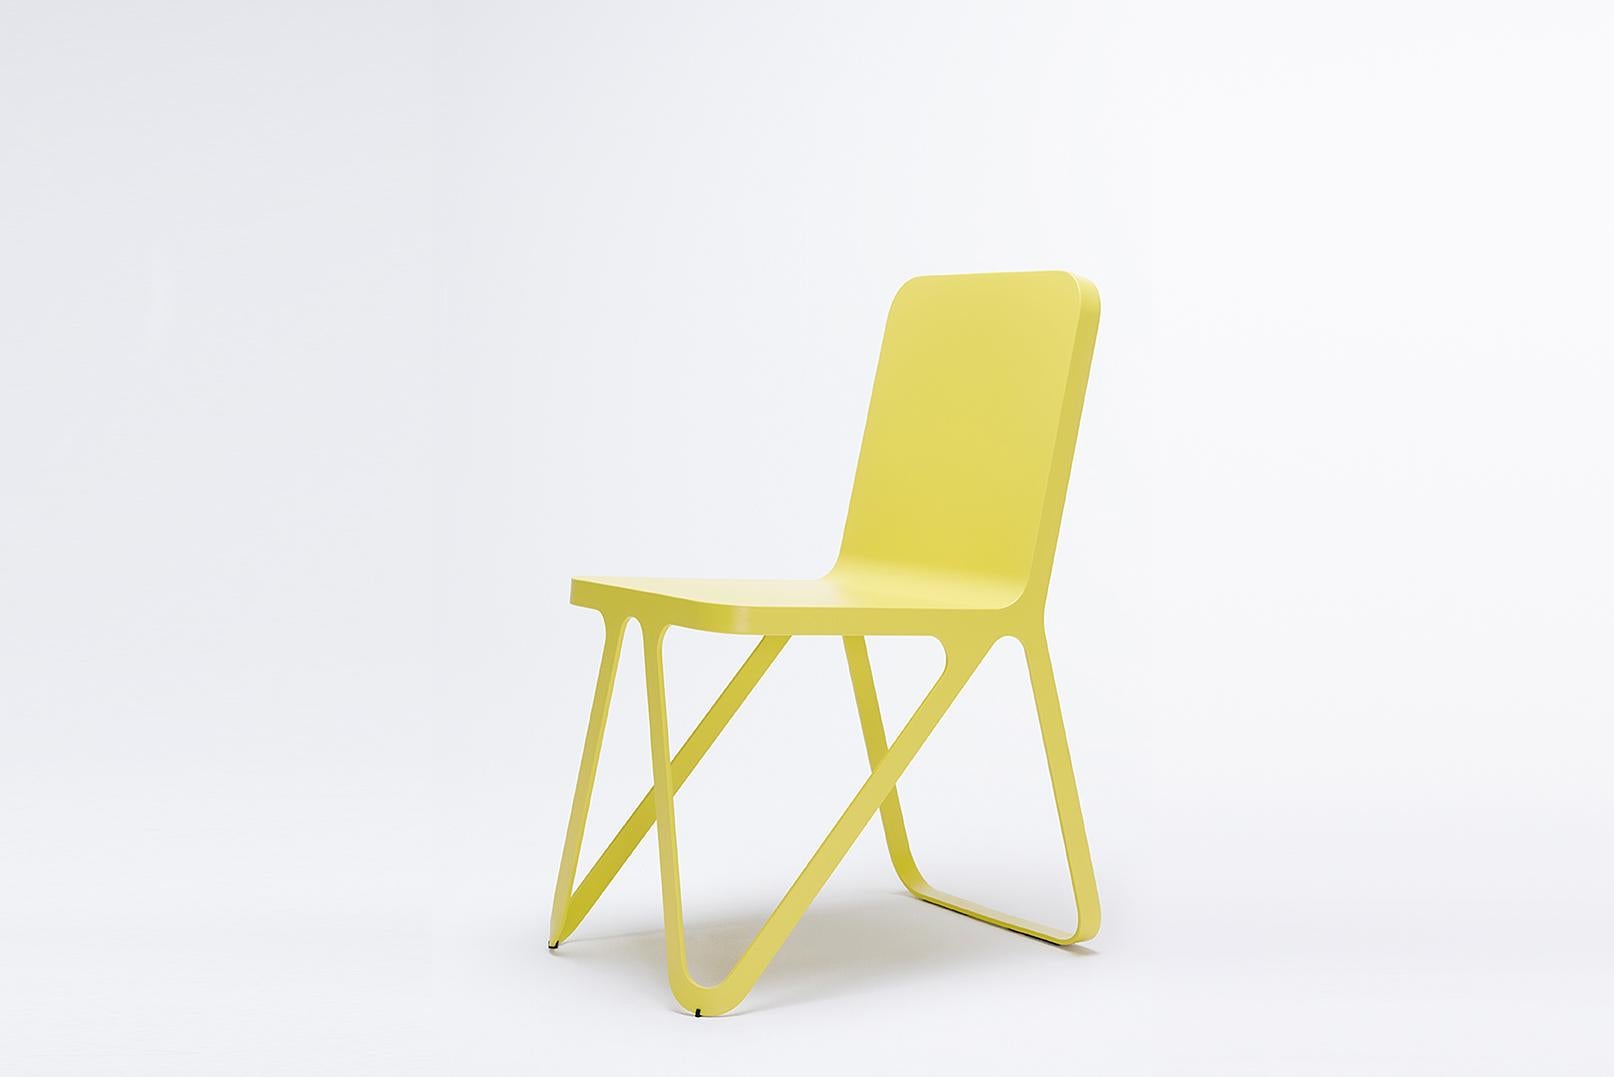 Sun Yellow loop chair by Sebastian Scherer
Dimensions: D57x w40 x H80 cm
Material: Aluminium.
Weight: 5.1 kg.
Also available: Colours: Snow white / light sand / sun yellow / clay orange / rust red / space blue / graphite grey / dark bronze /